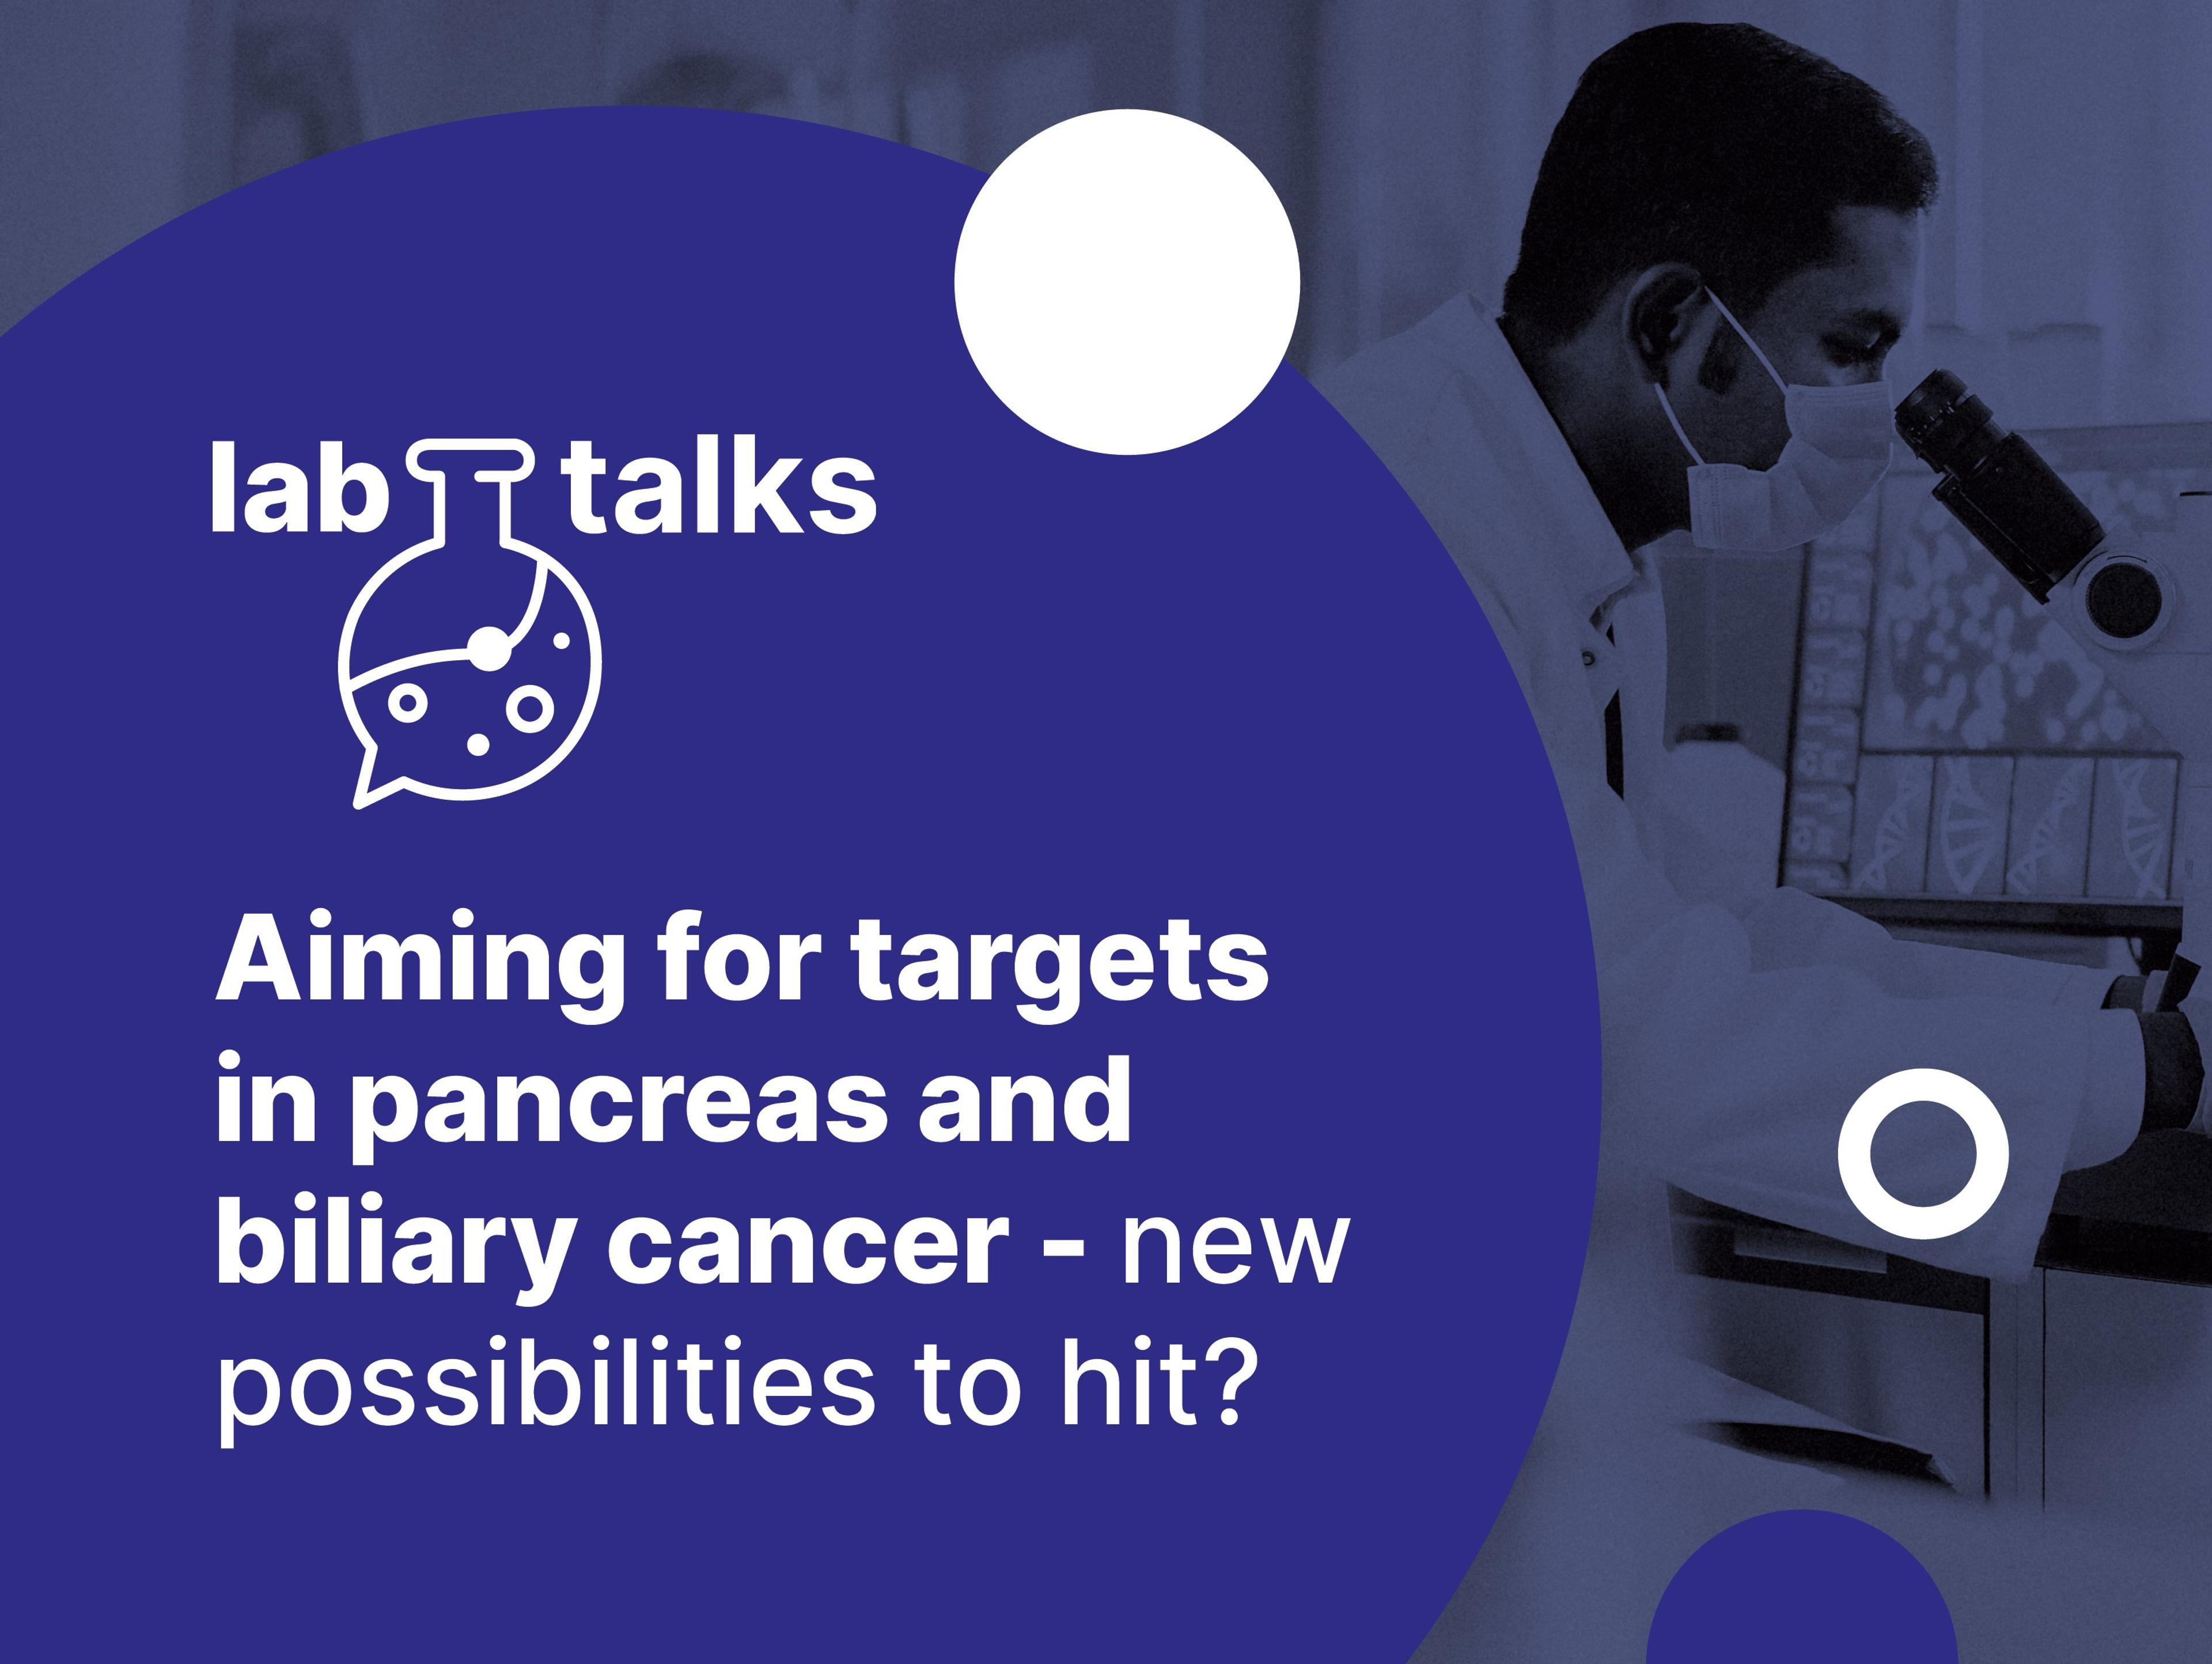 Aiming for targets in pancreas and biliary cancer - new possibilities to hit?